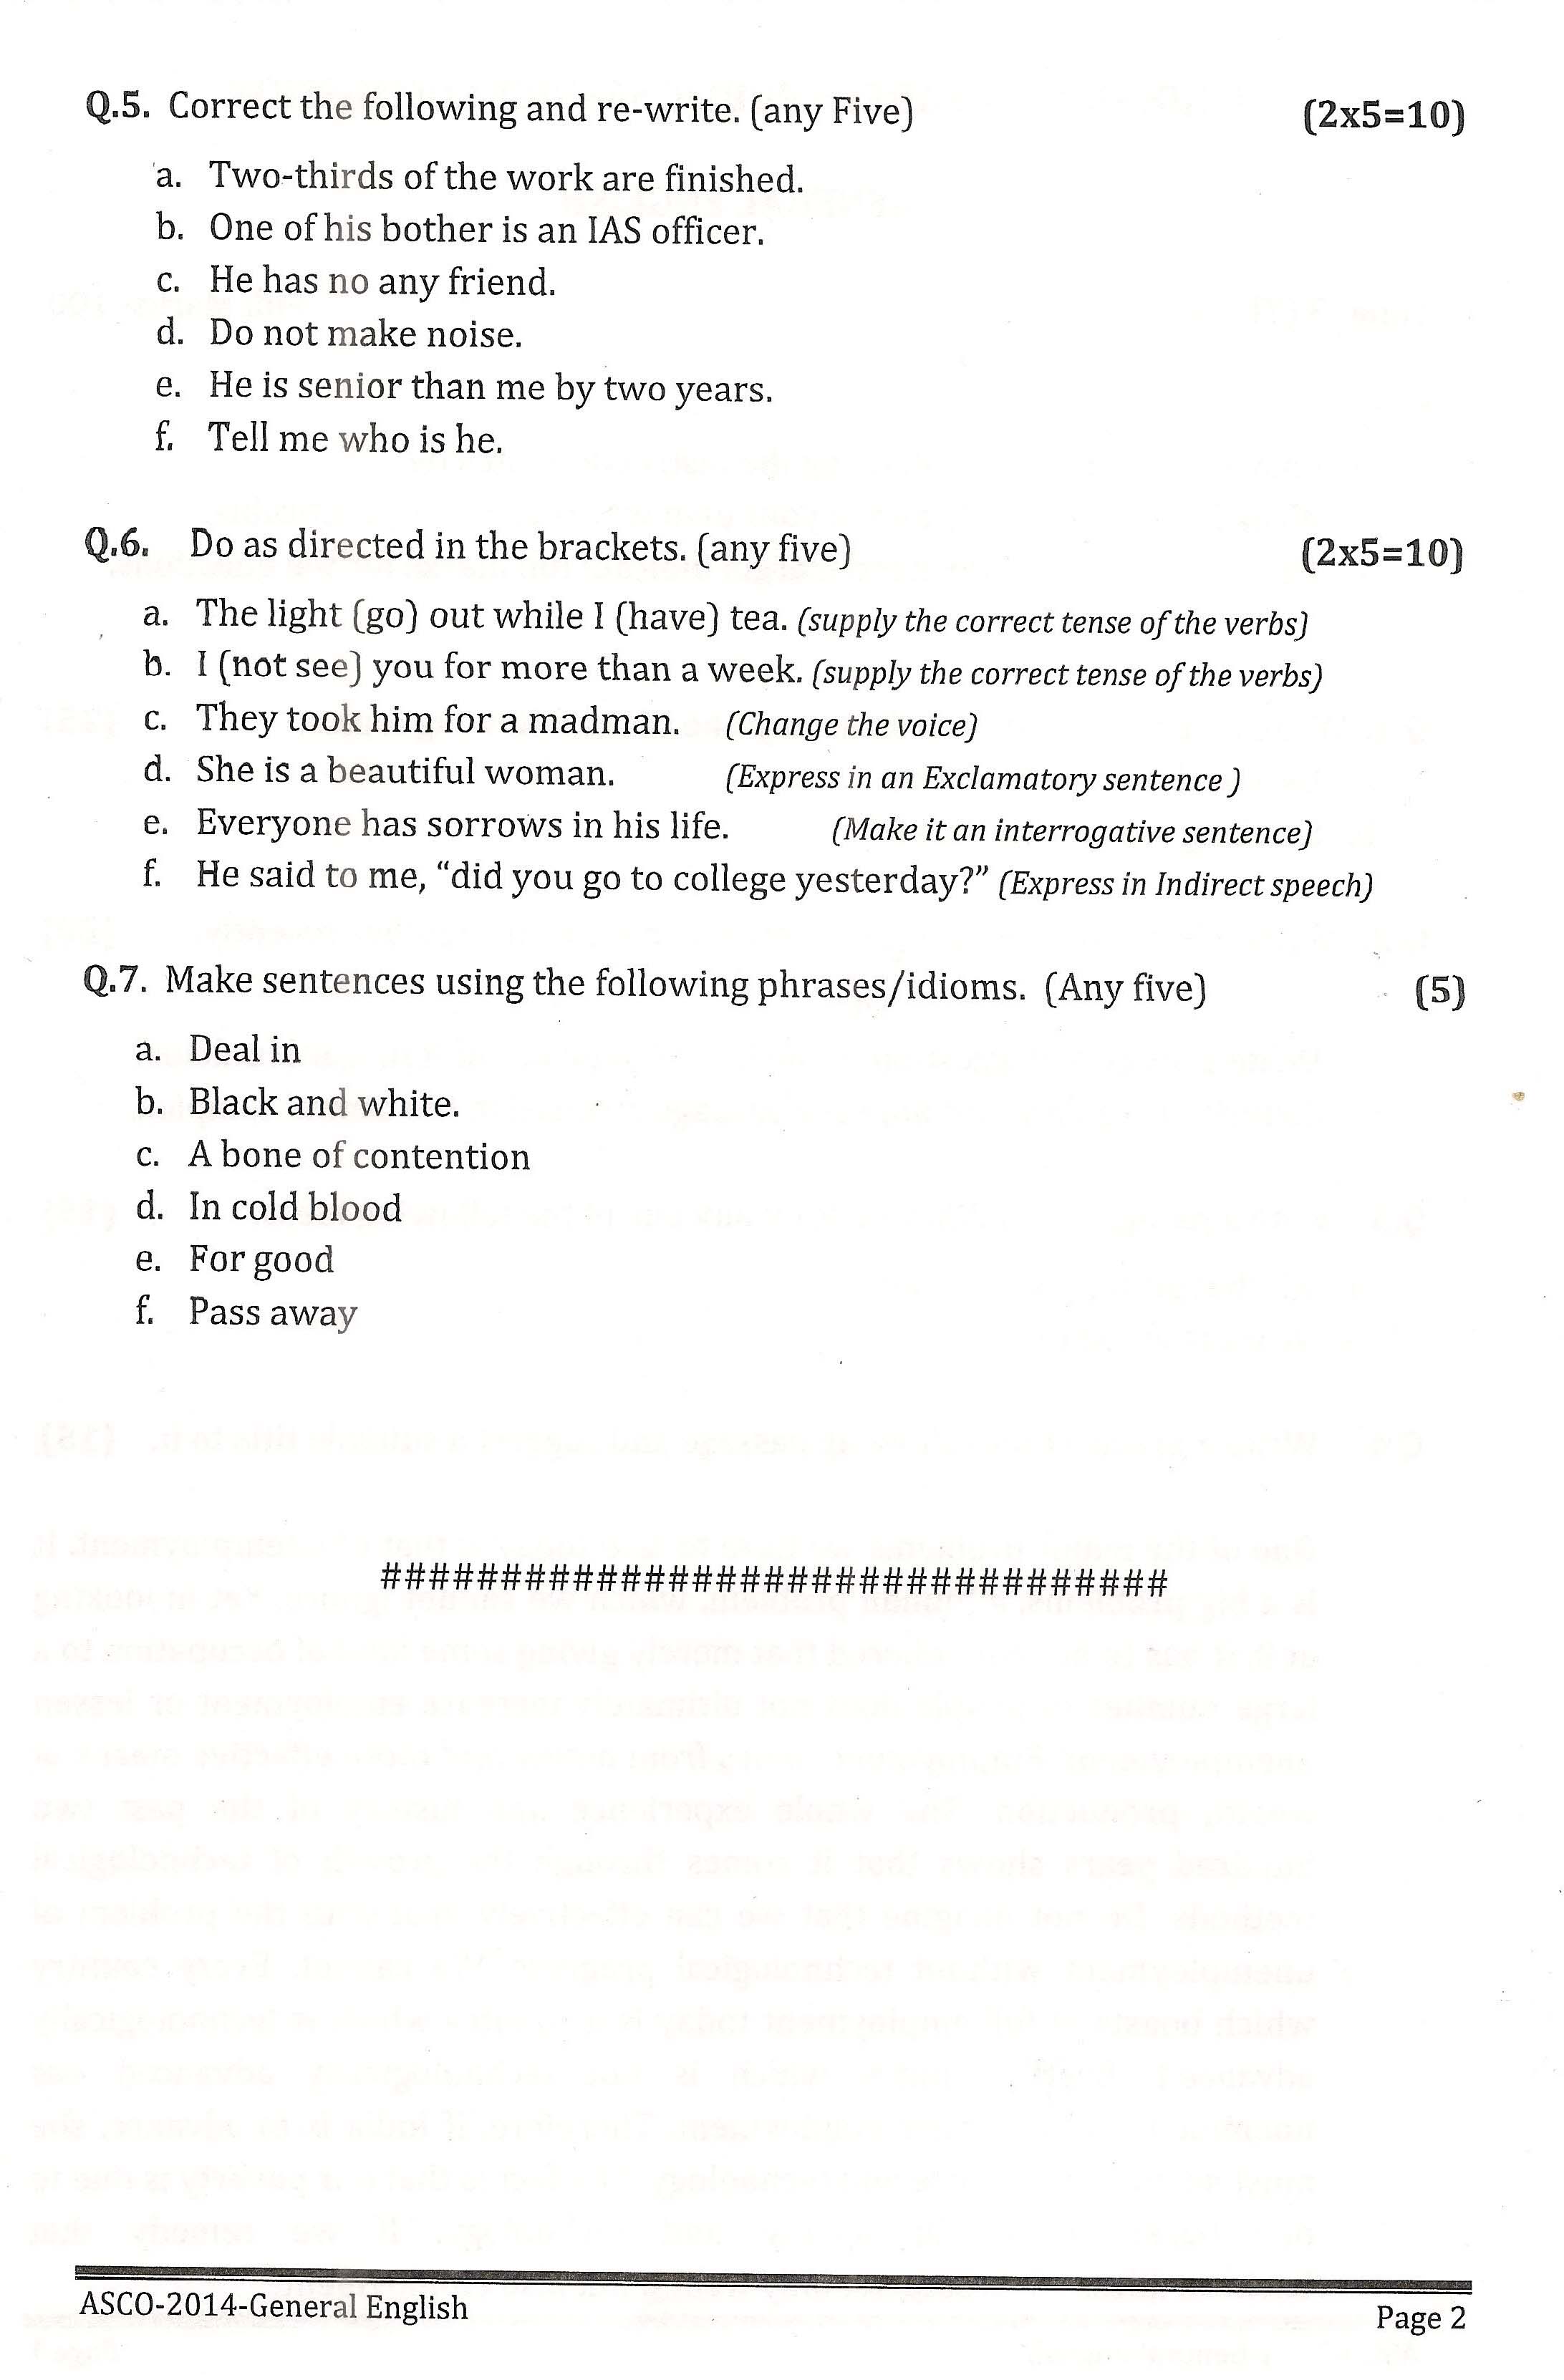 APPSC ASCO General English Exam Question Paper 2014 2